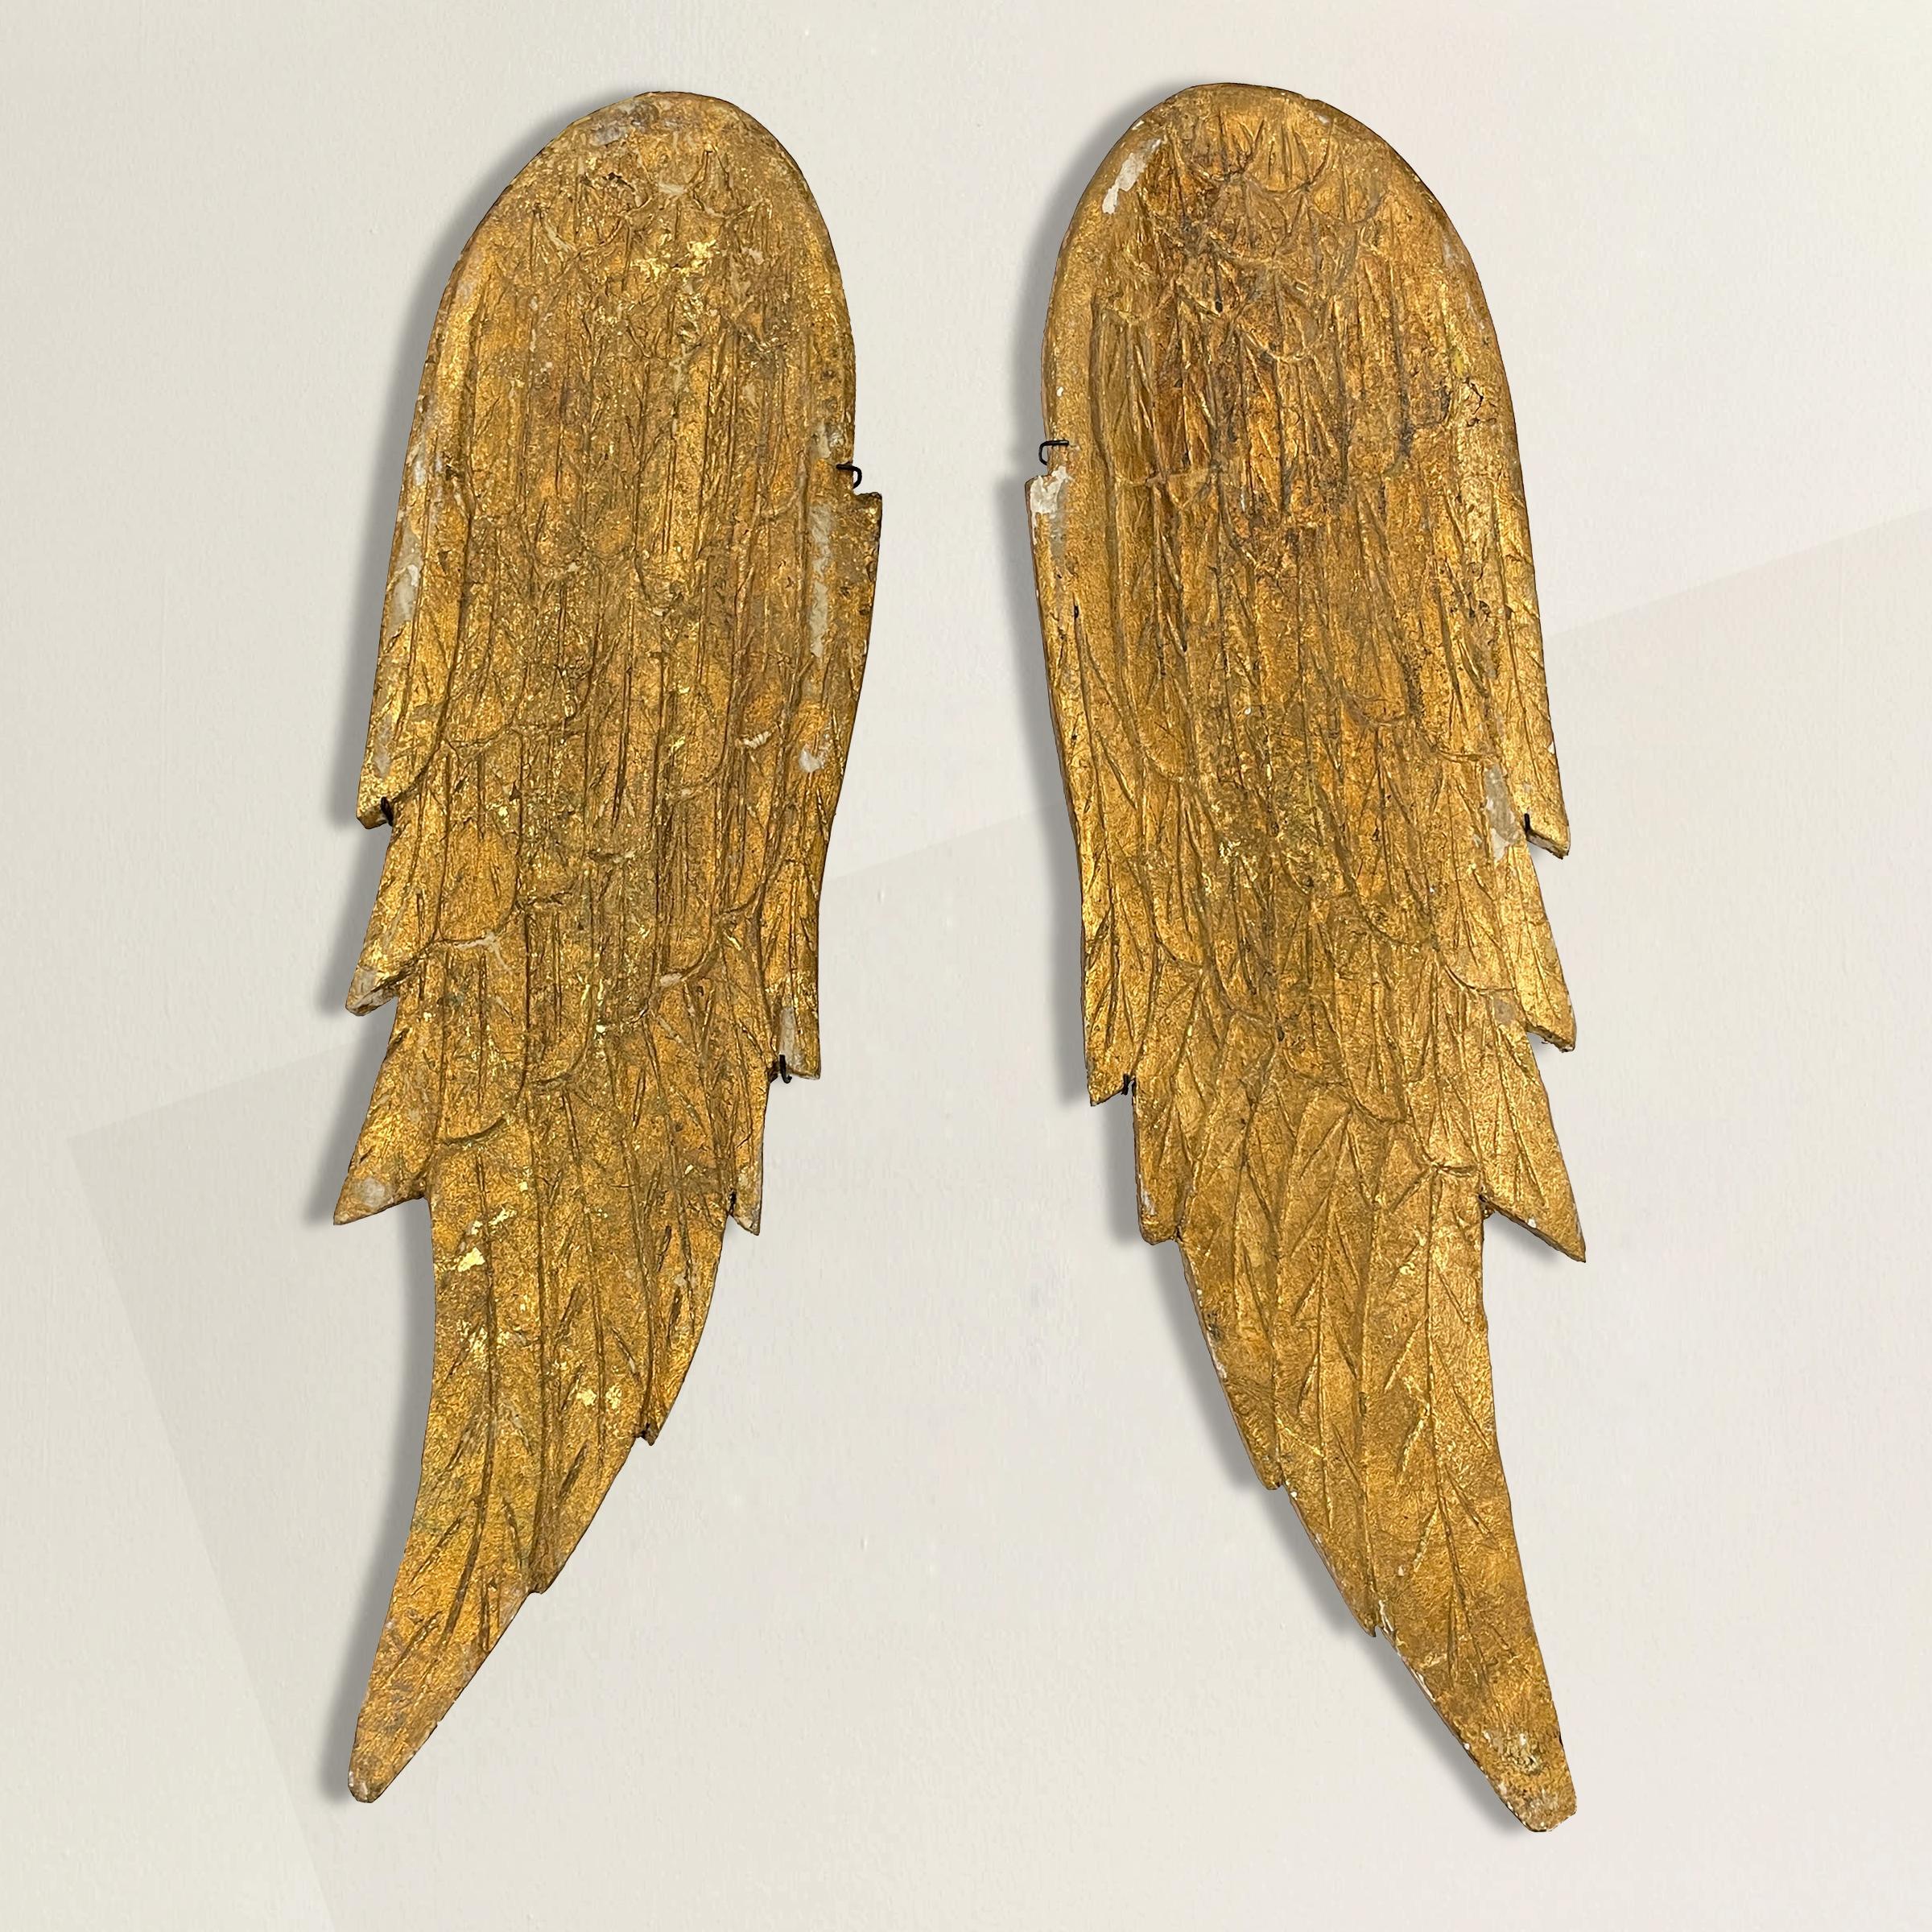 A special pair of 20th century hand-carved wood angel wings with a gold leaf finish, and each mounted on a custom steel wall mount. They are mounted individually, so they may be displayed separately and positioned in any orientation desired.